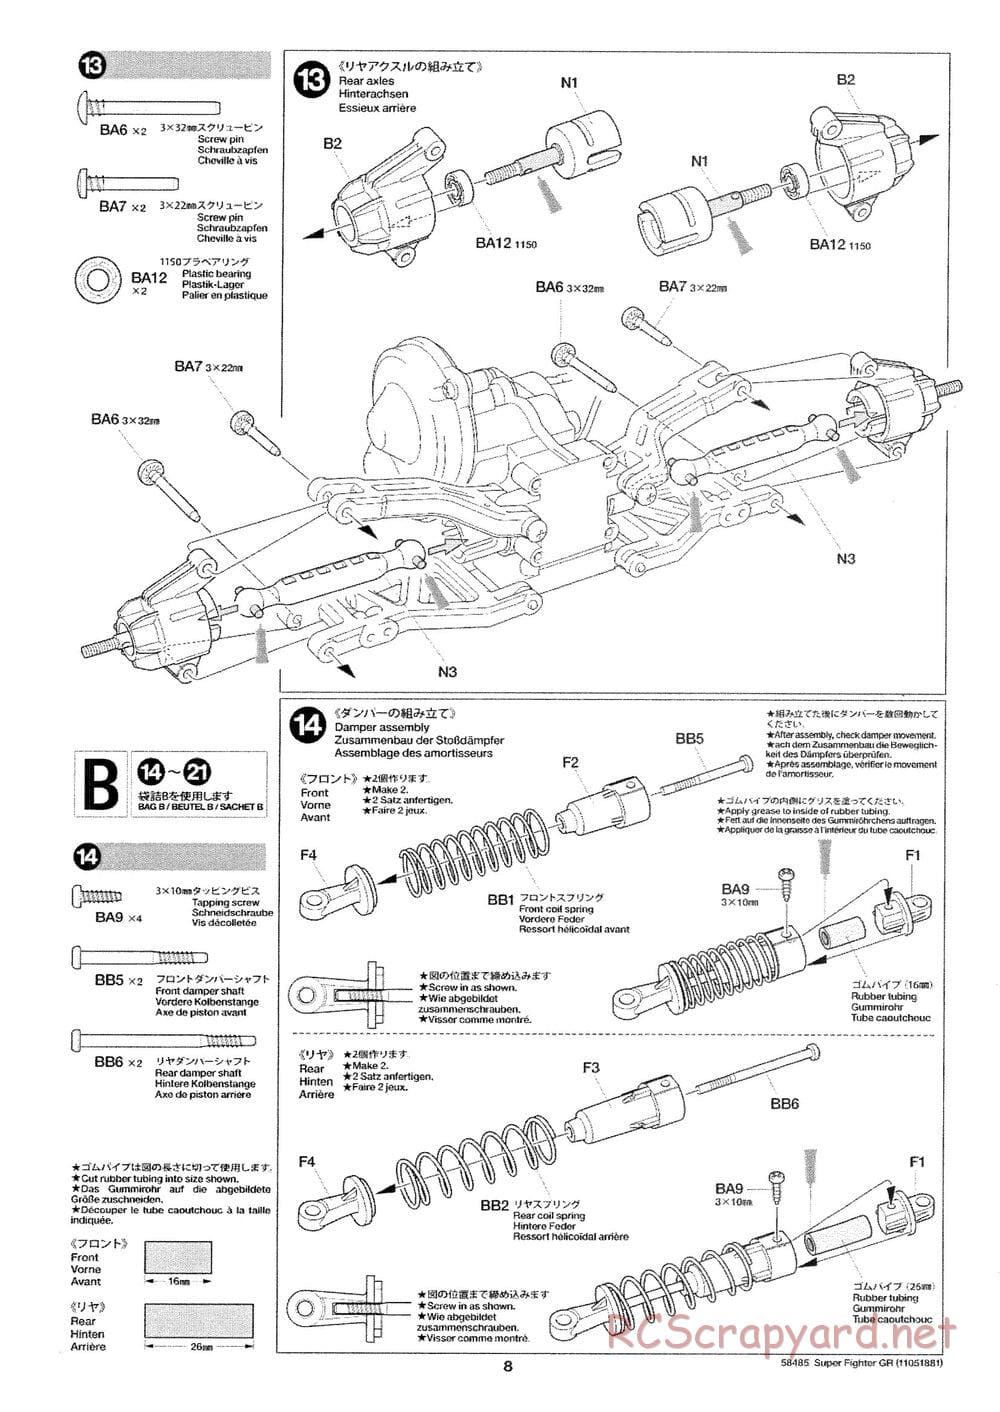 Tamiya - Super Fighter GR - DT-02 Chassis - Manual - Page 8